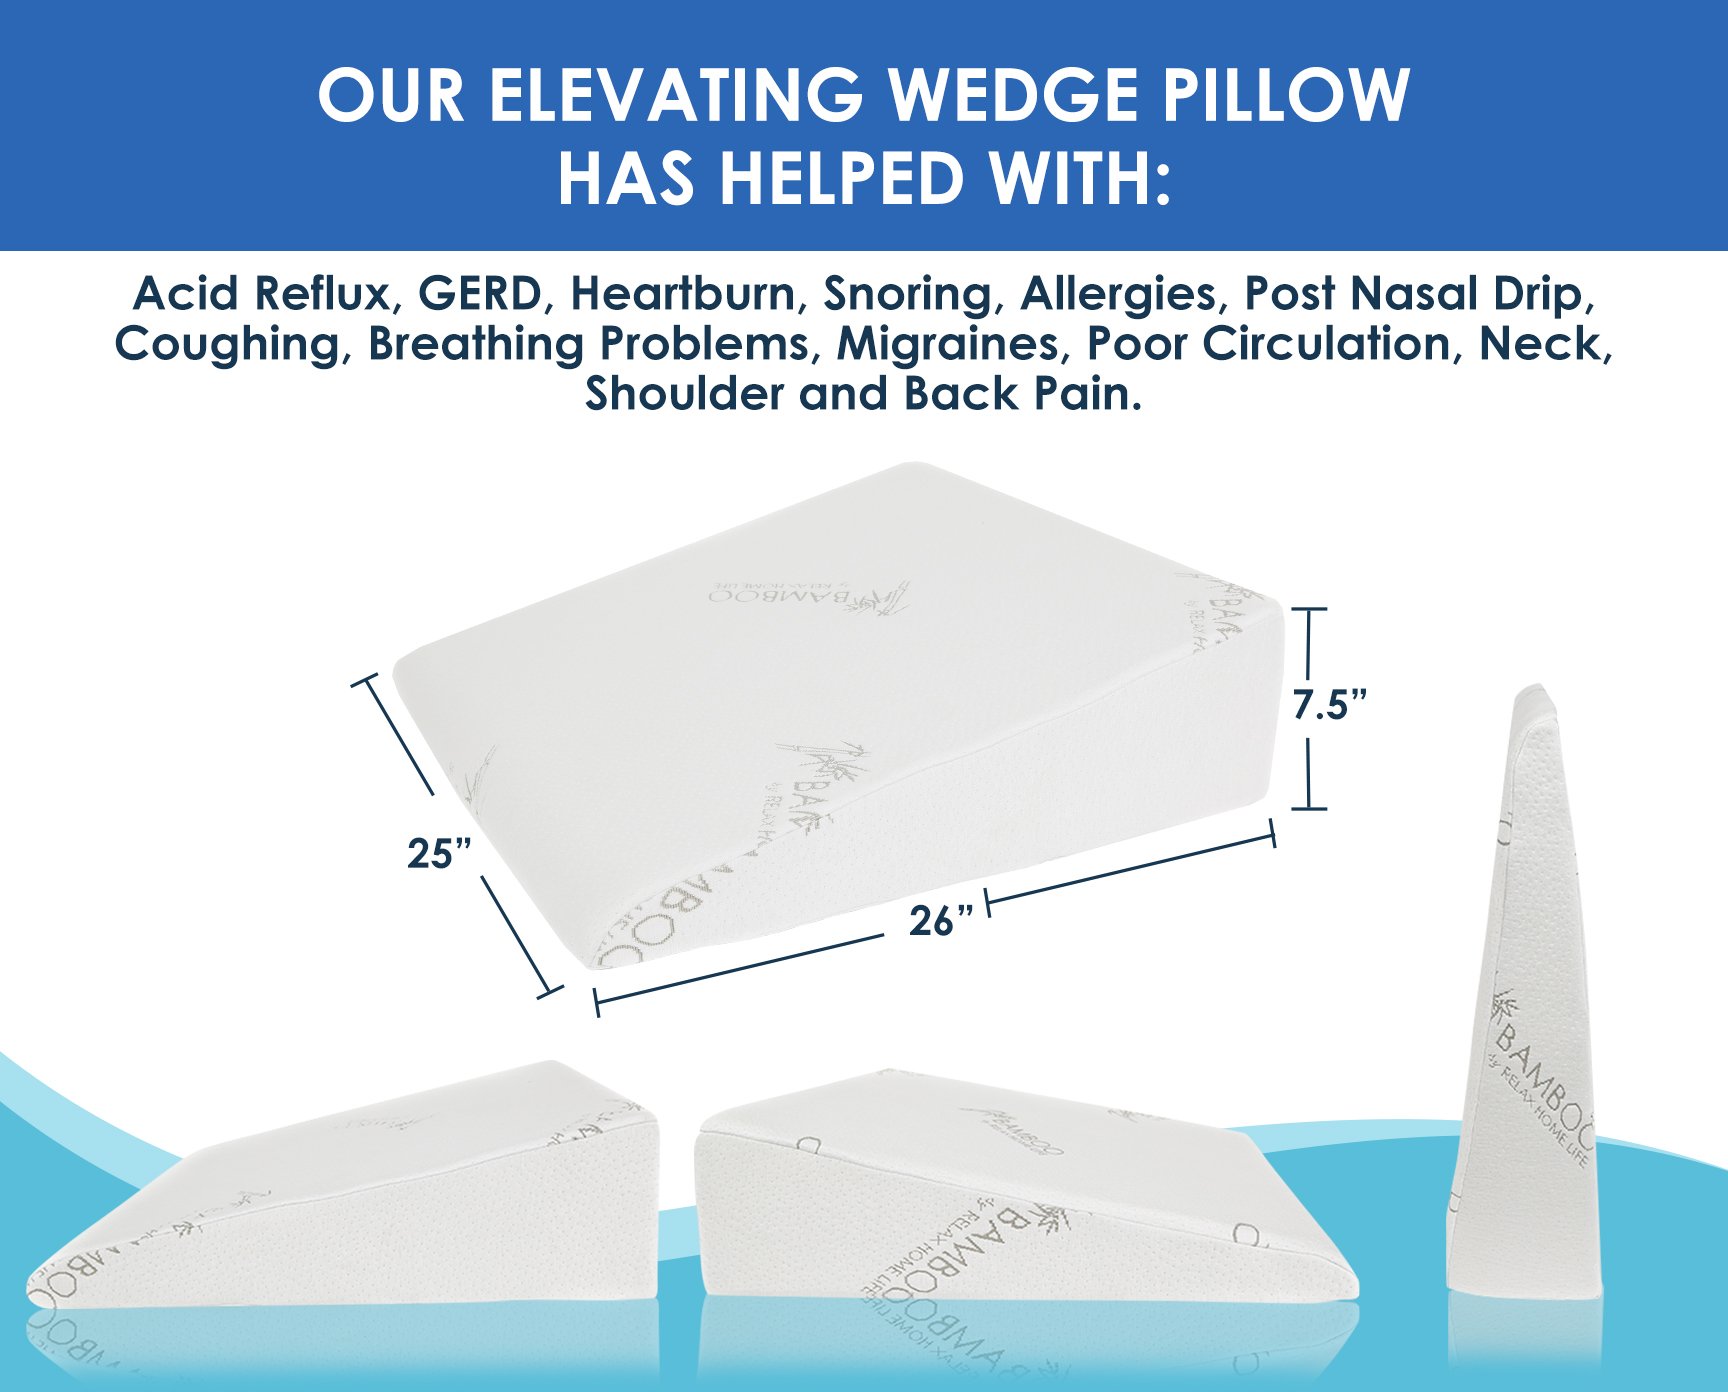 Relax Home Life 7.5 Inch Bed Wedge Pillow for Acid Reflux, 1.5 Inch Memory Foam Top with Bamboo Cover, 25